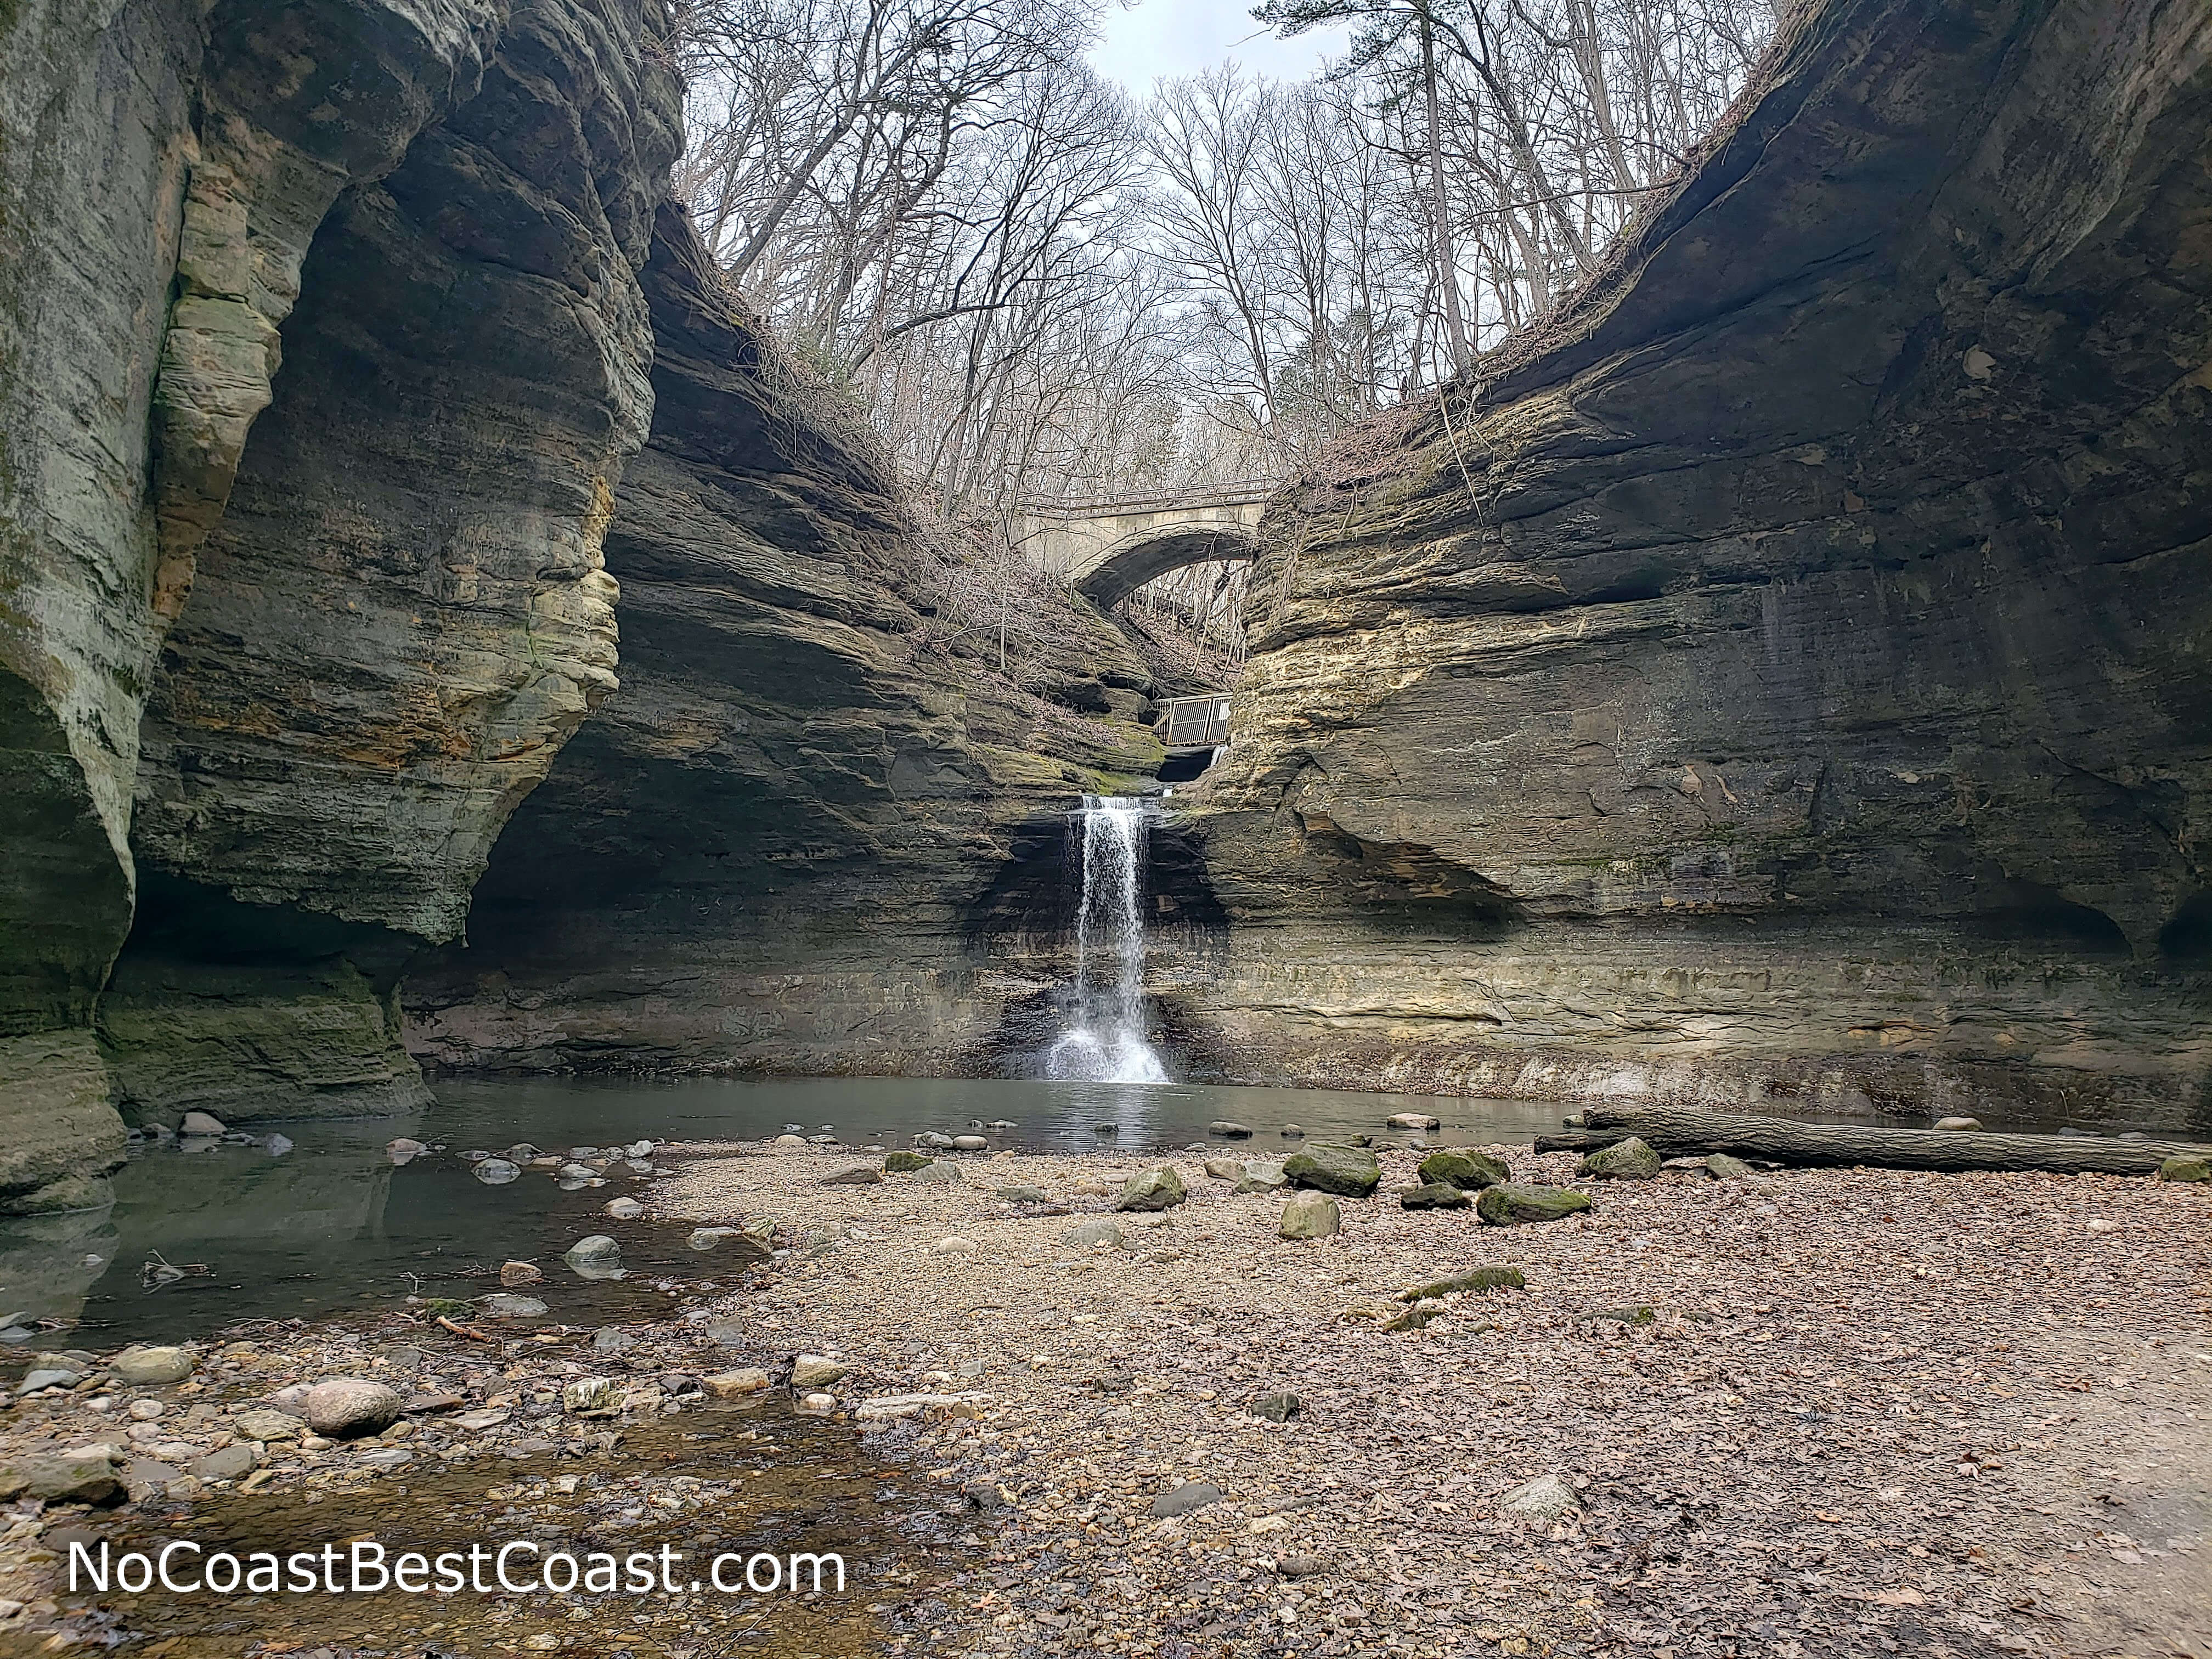 Cascade Falls is surrounded by awesome sandstone cliffs